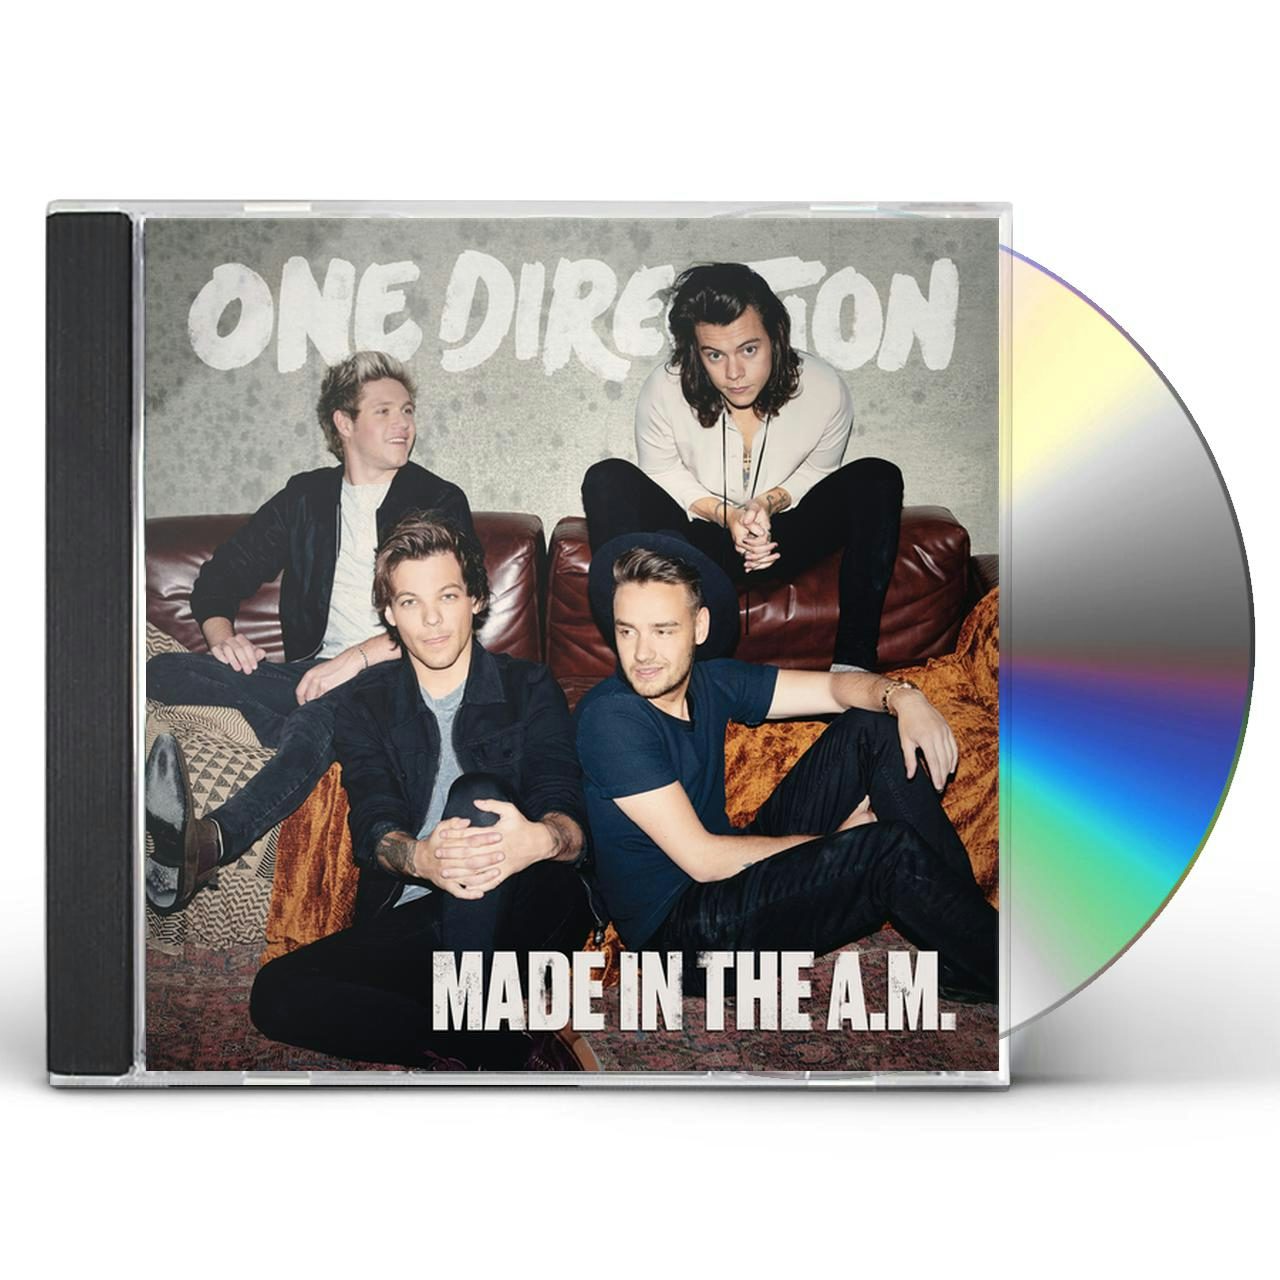 made in the am album cover hd